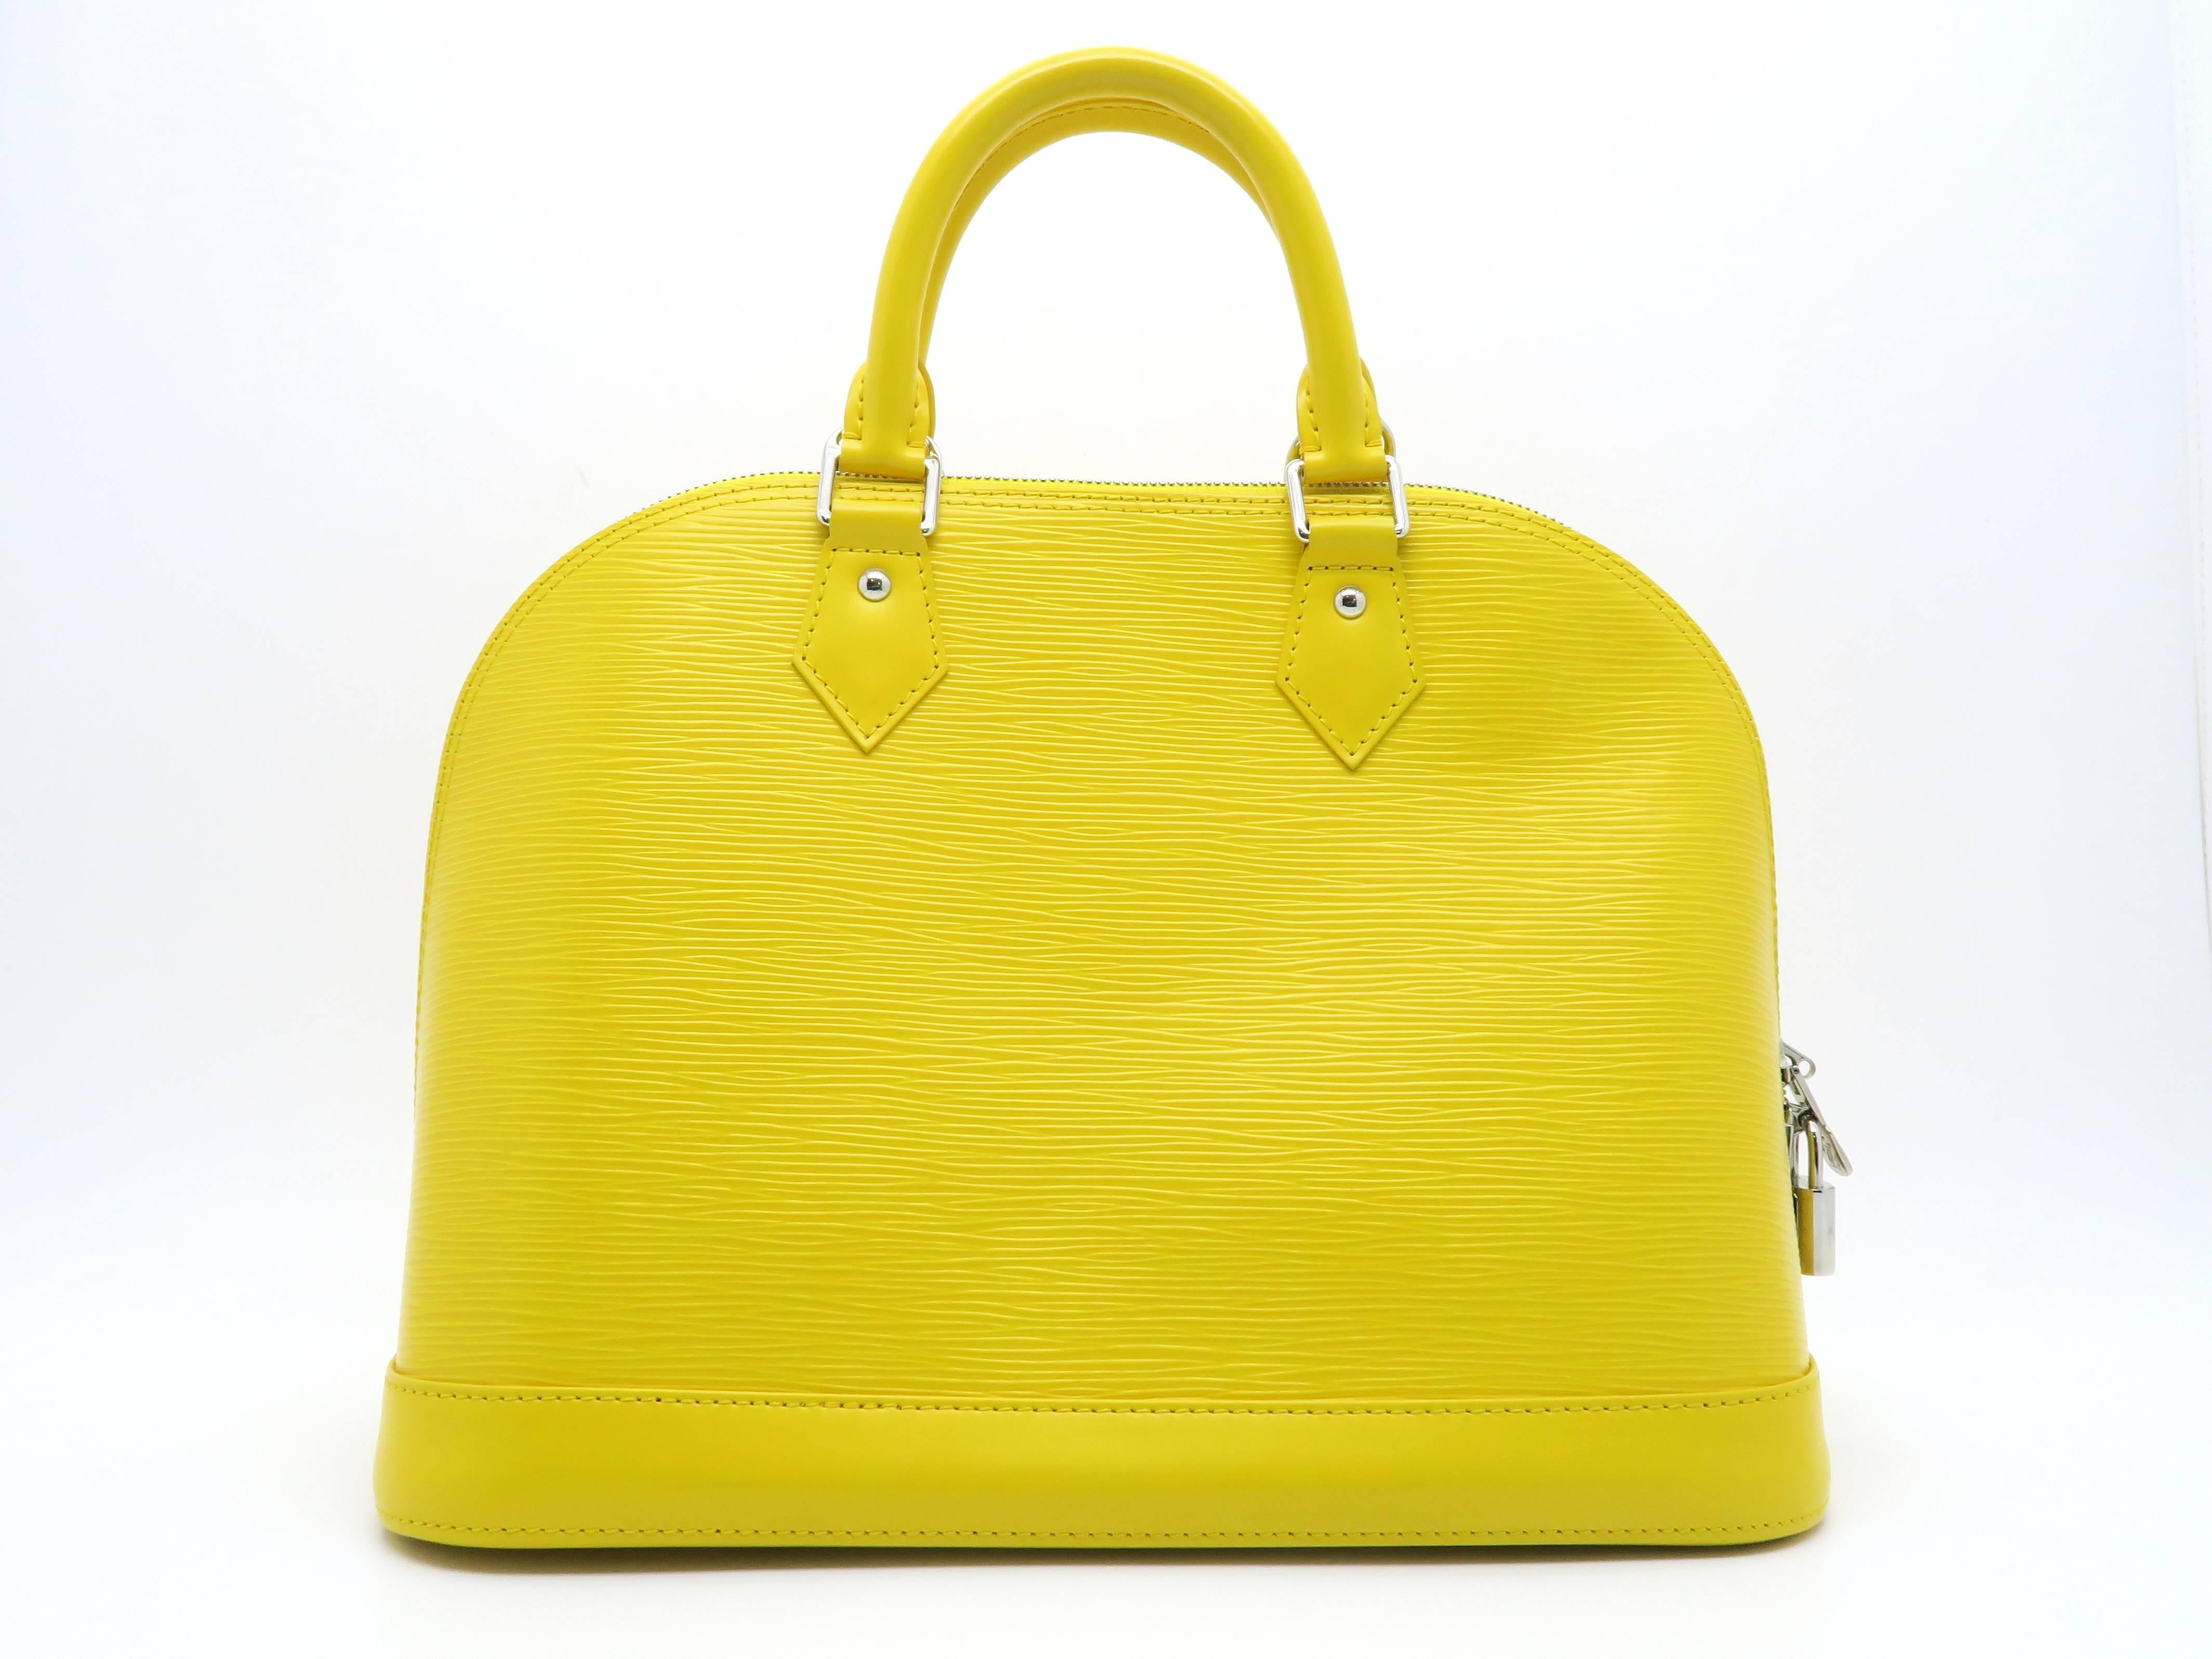 Louis Vuitton Alma PM Epi Leather Yellow Handbag In New Condition For Sale In Kowloon, HK